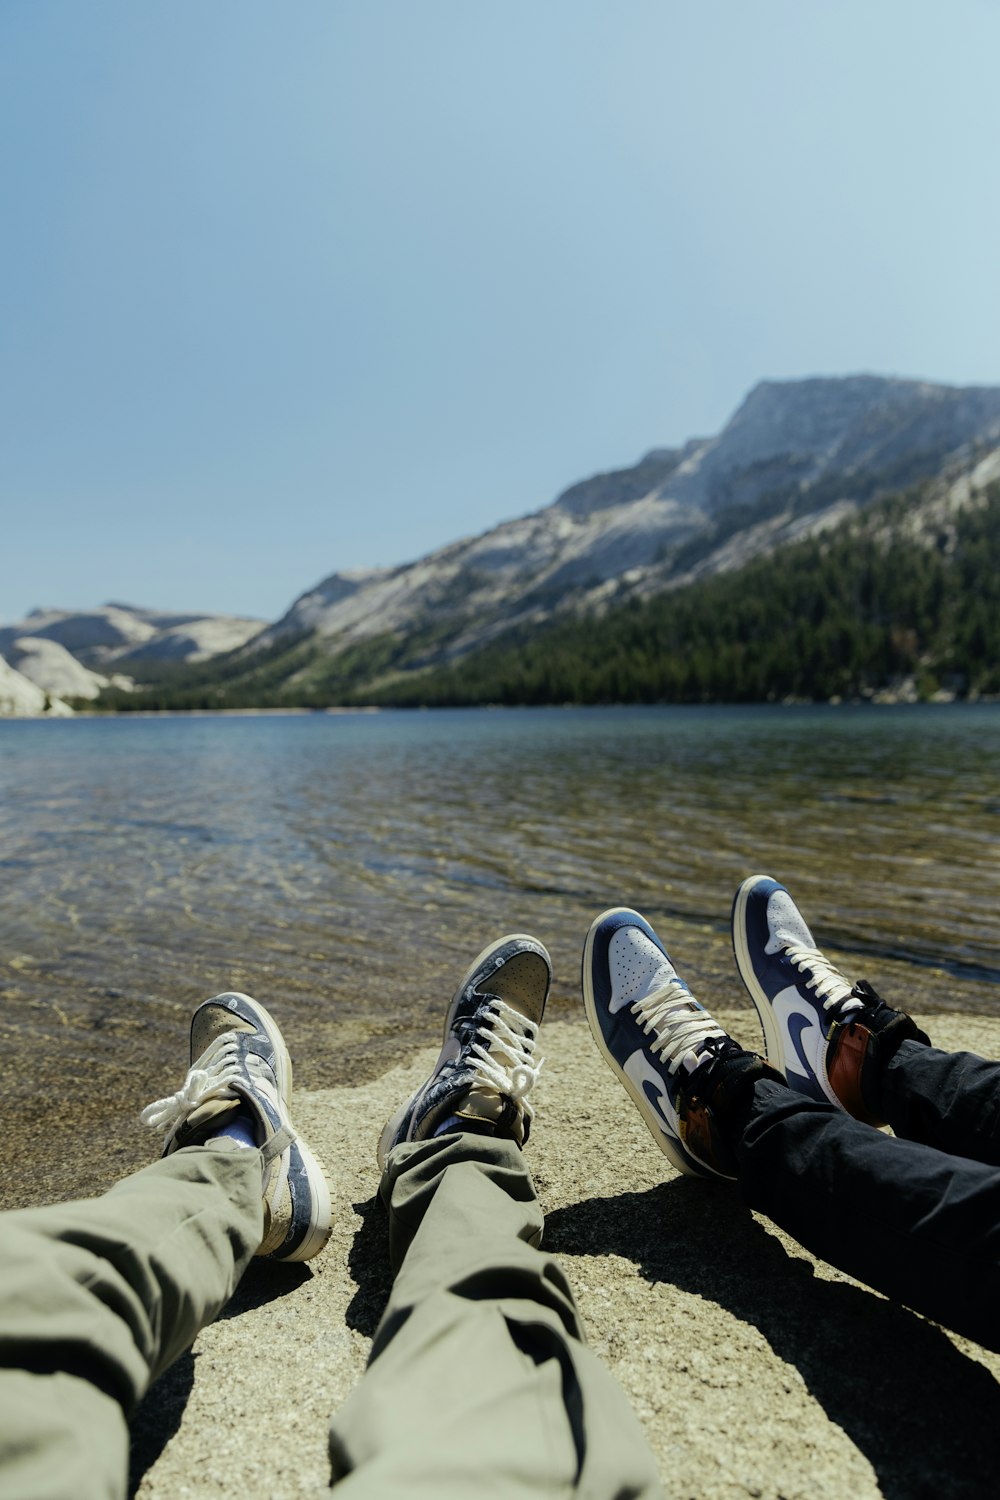 person in black pants and white sneakers sitting on rock near body of water during daytime